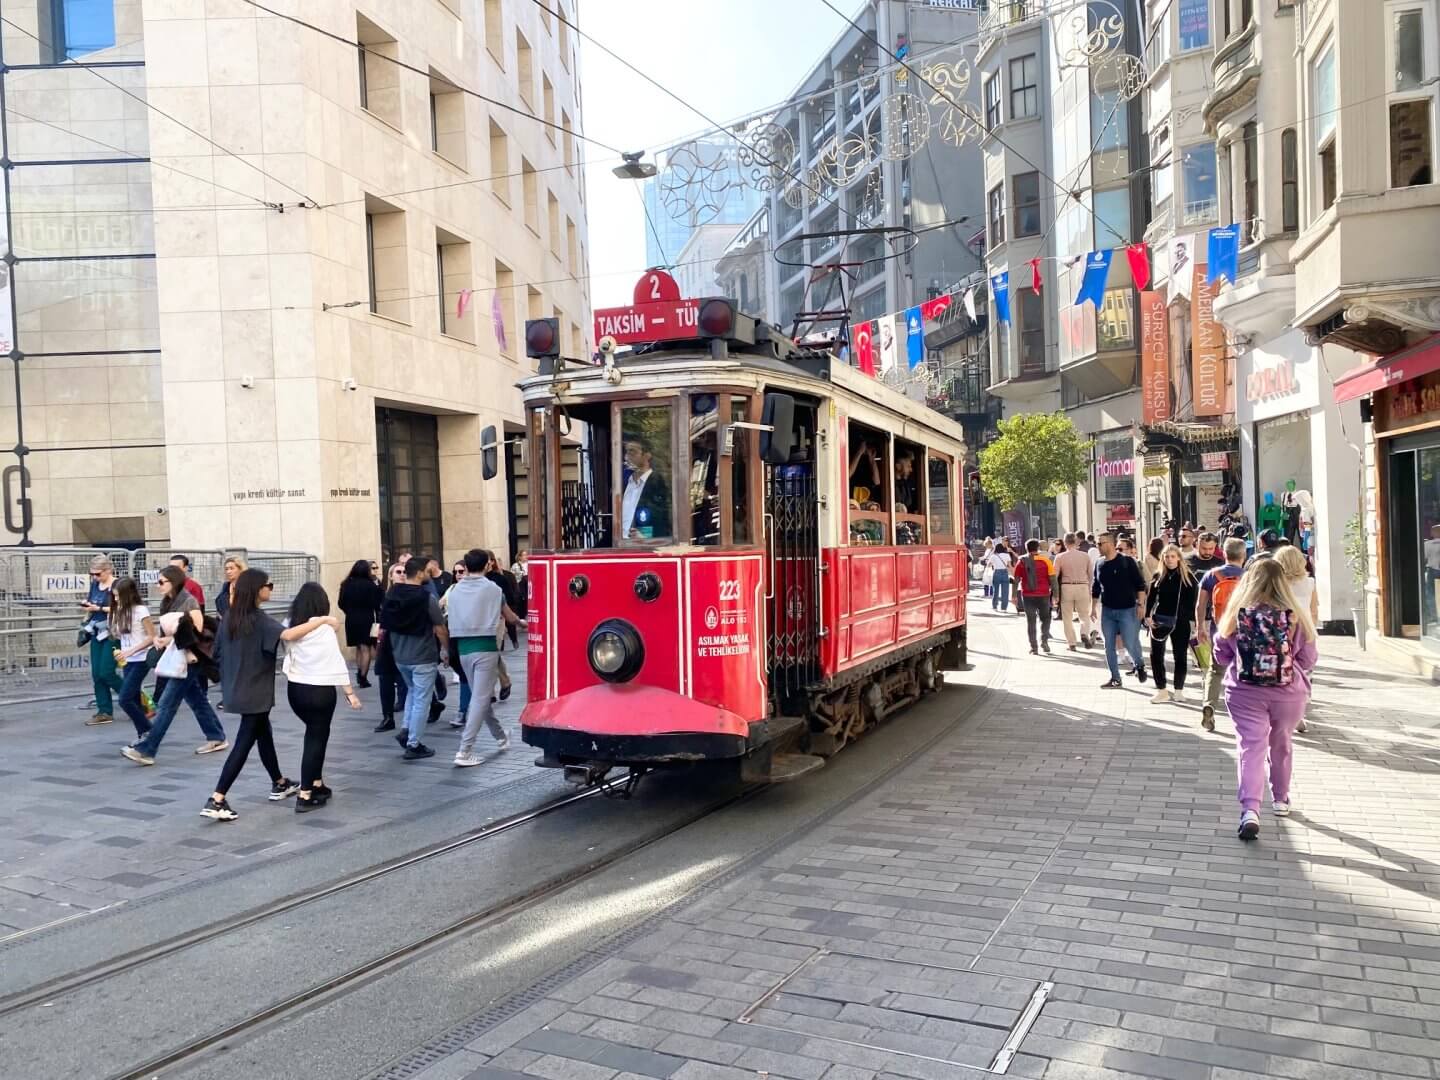 People walk either side of the vintage tram coming up Istiklal Street